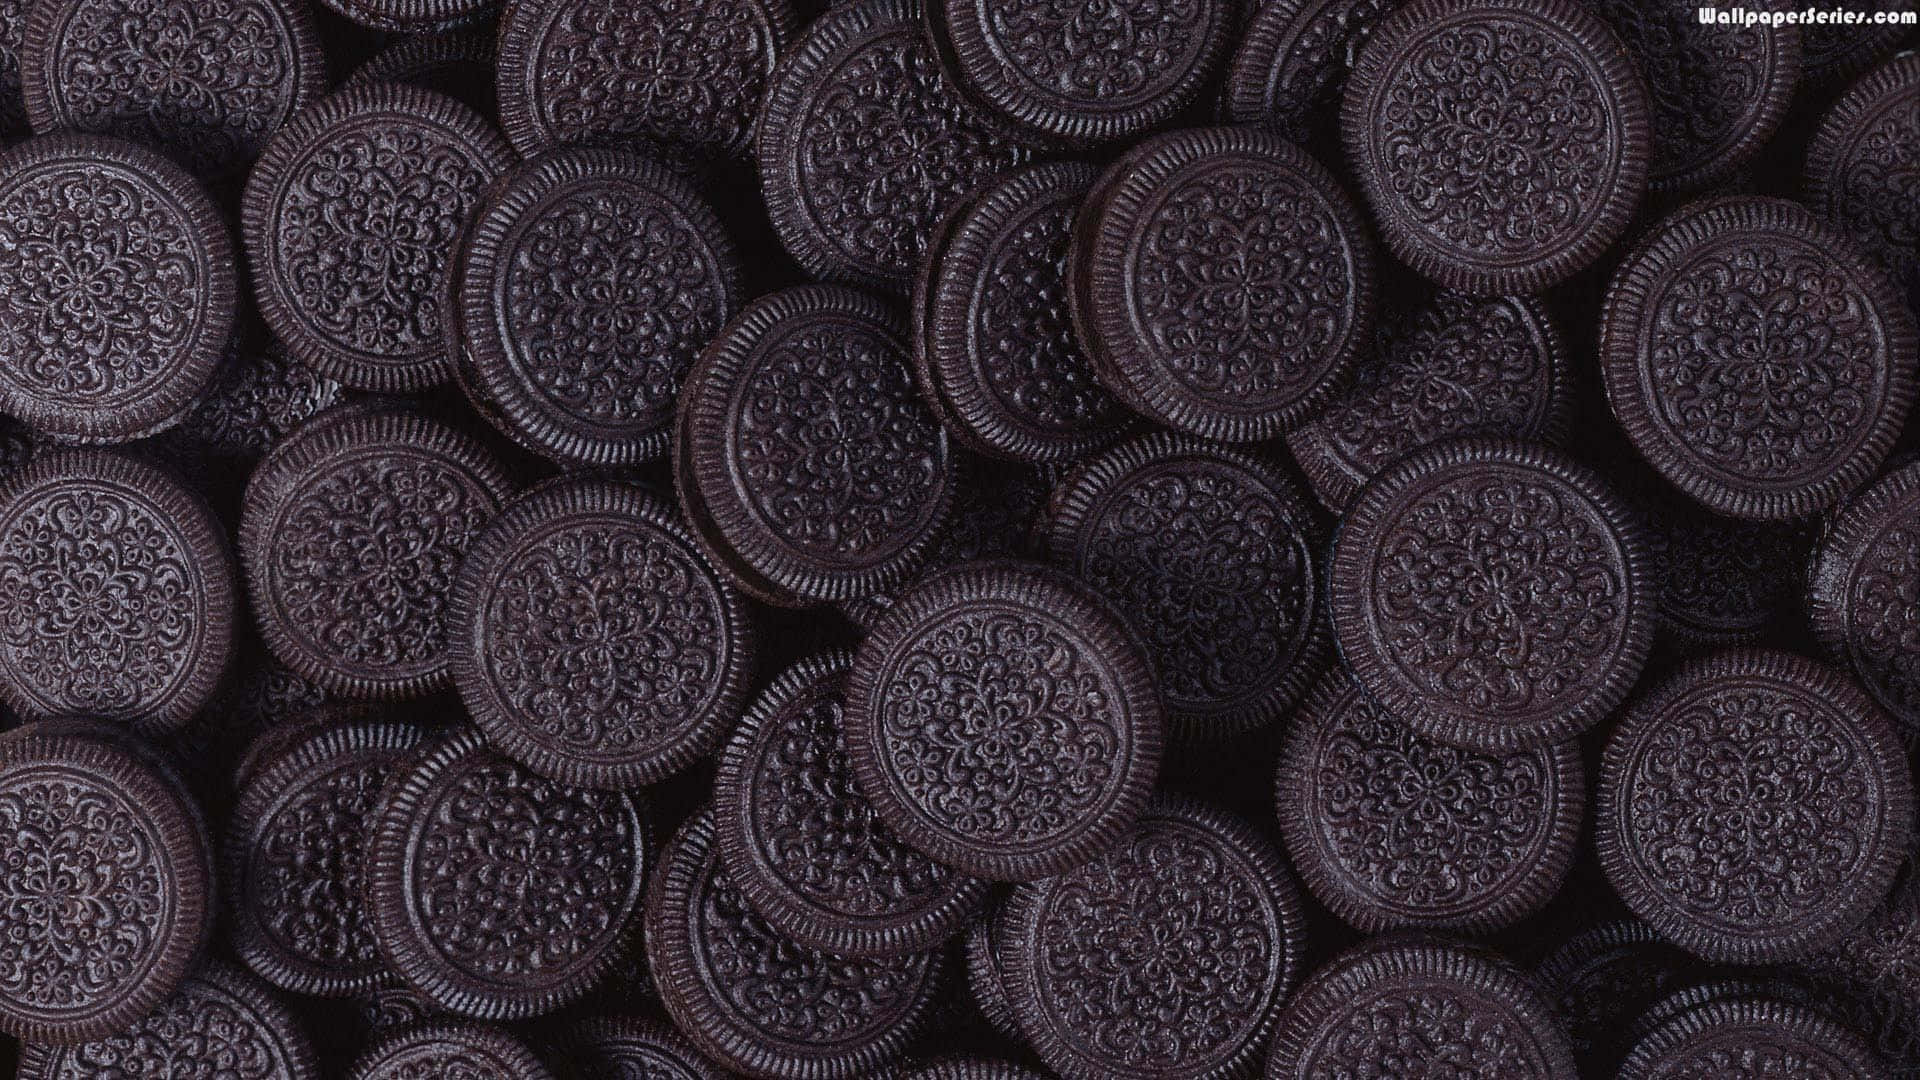 Oreo Cookies On A Black Background Wallpaper